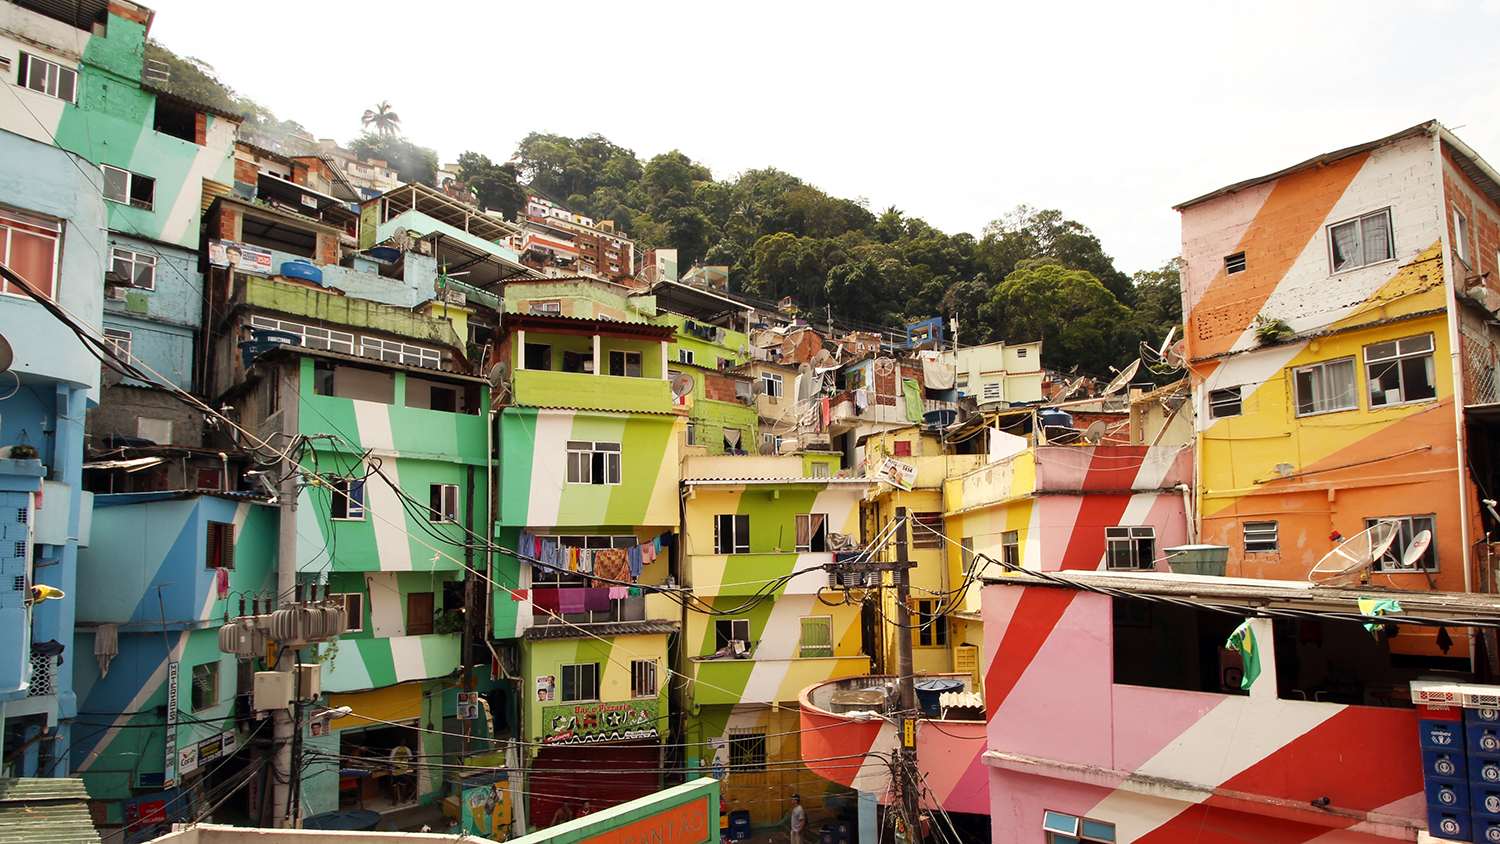 Colorful houses in South America